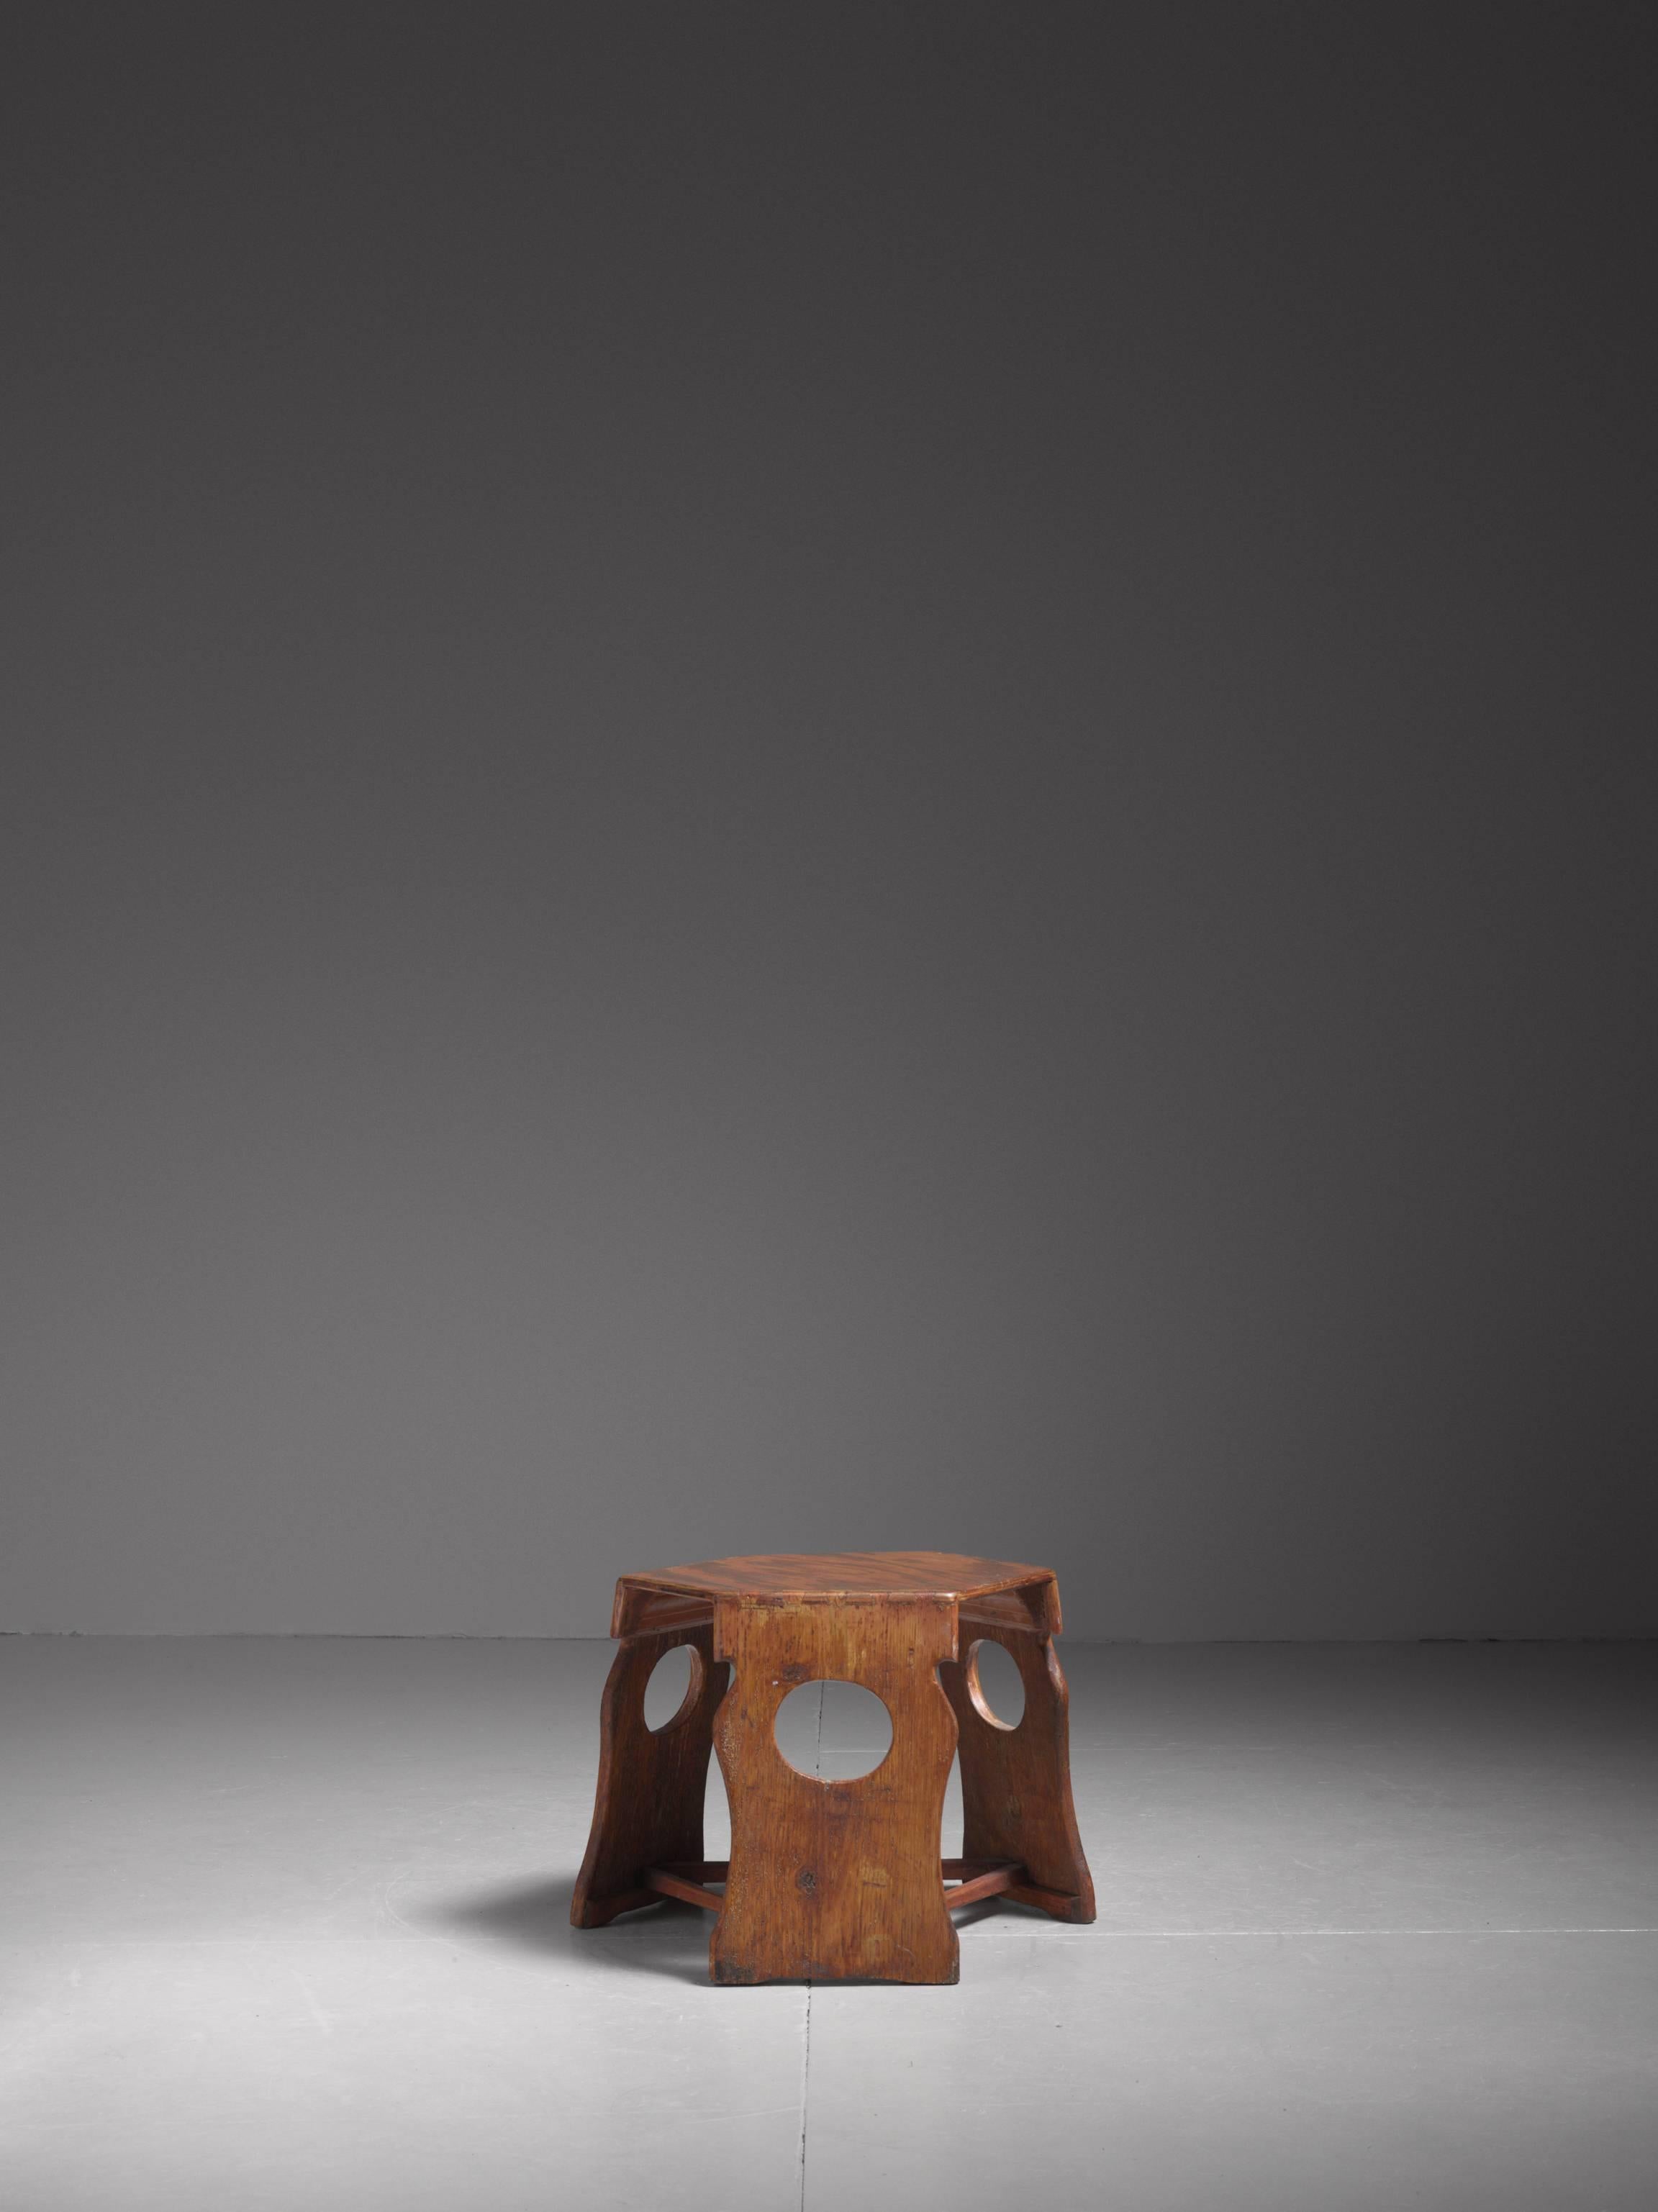 A hexagonal stool or side table made of pine, with three sculpted legs with beautiful wood connections.

A unique, craft fully made piece with a strong patina on the wood.